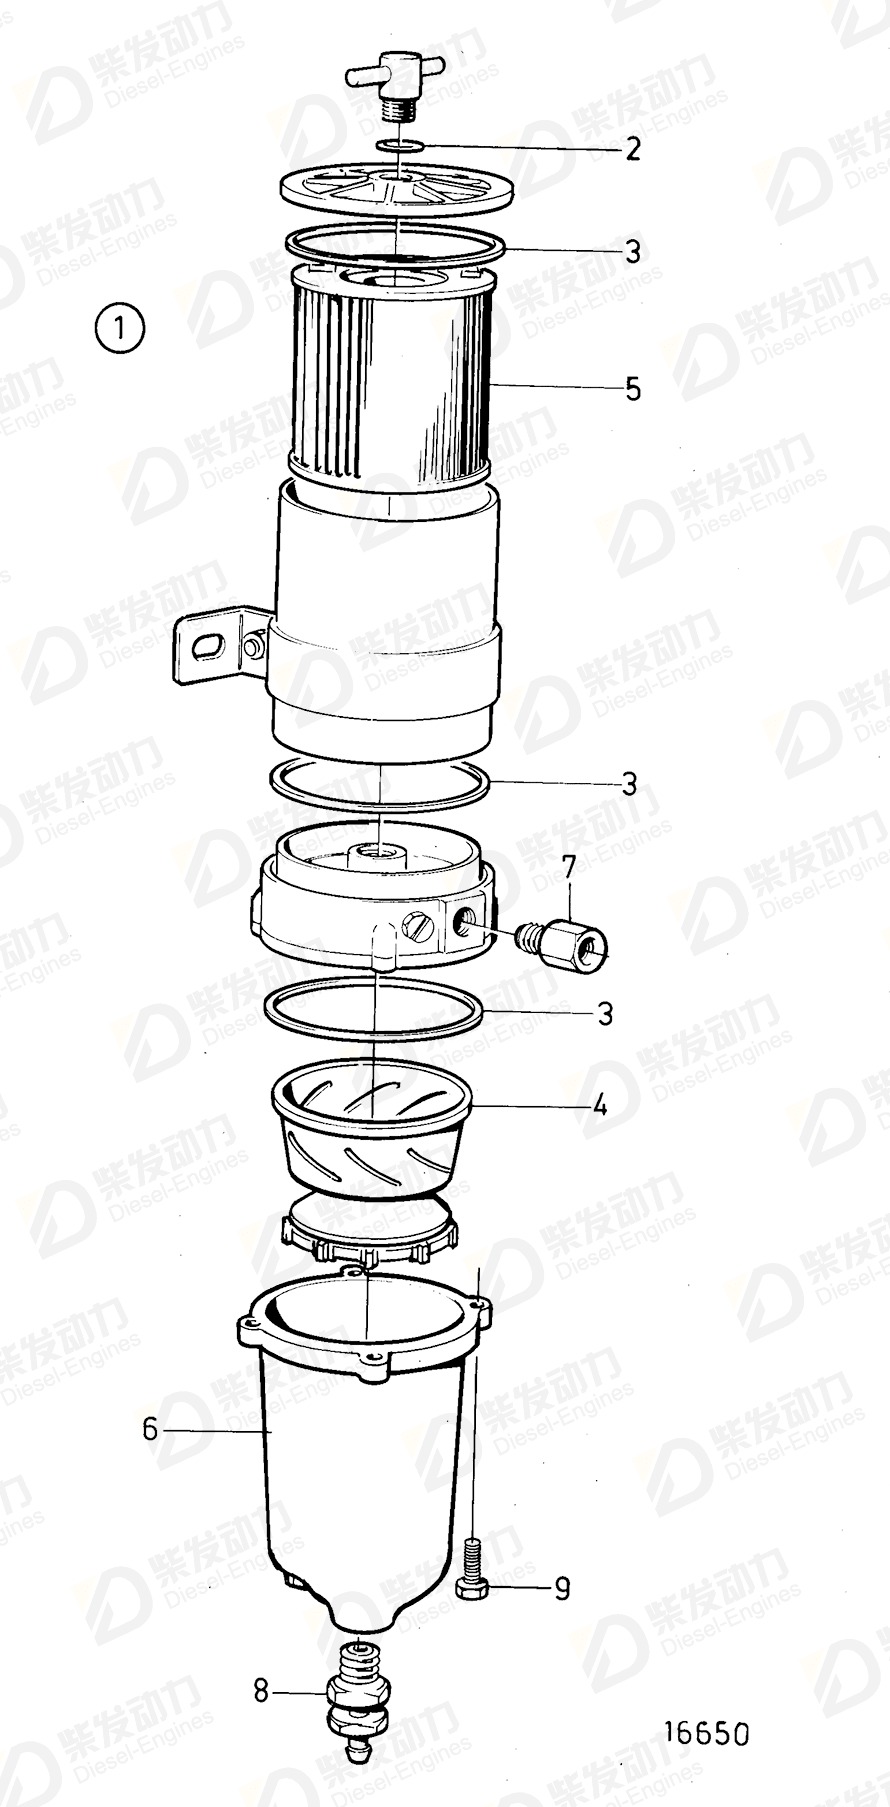 VOLVO Fuel filter 3825020 Drawing